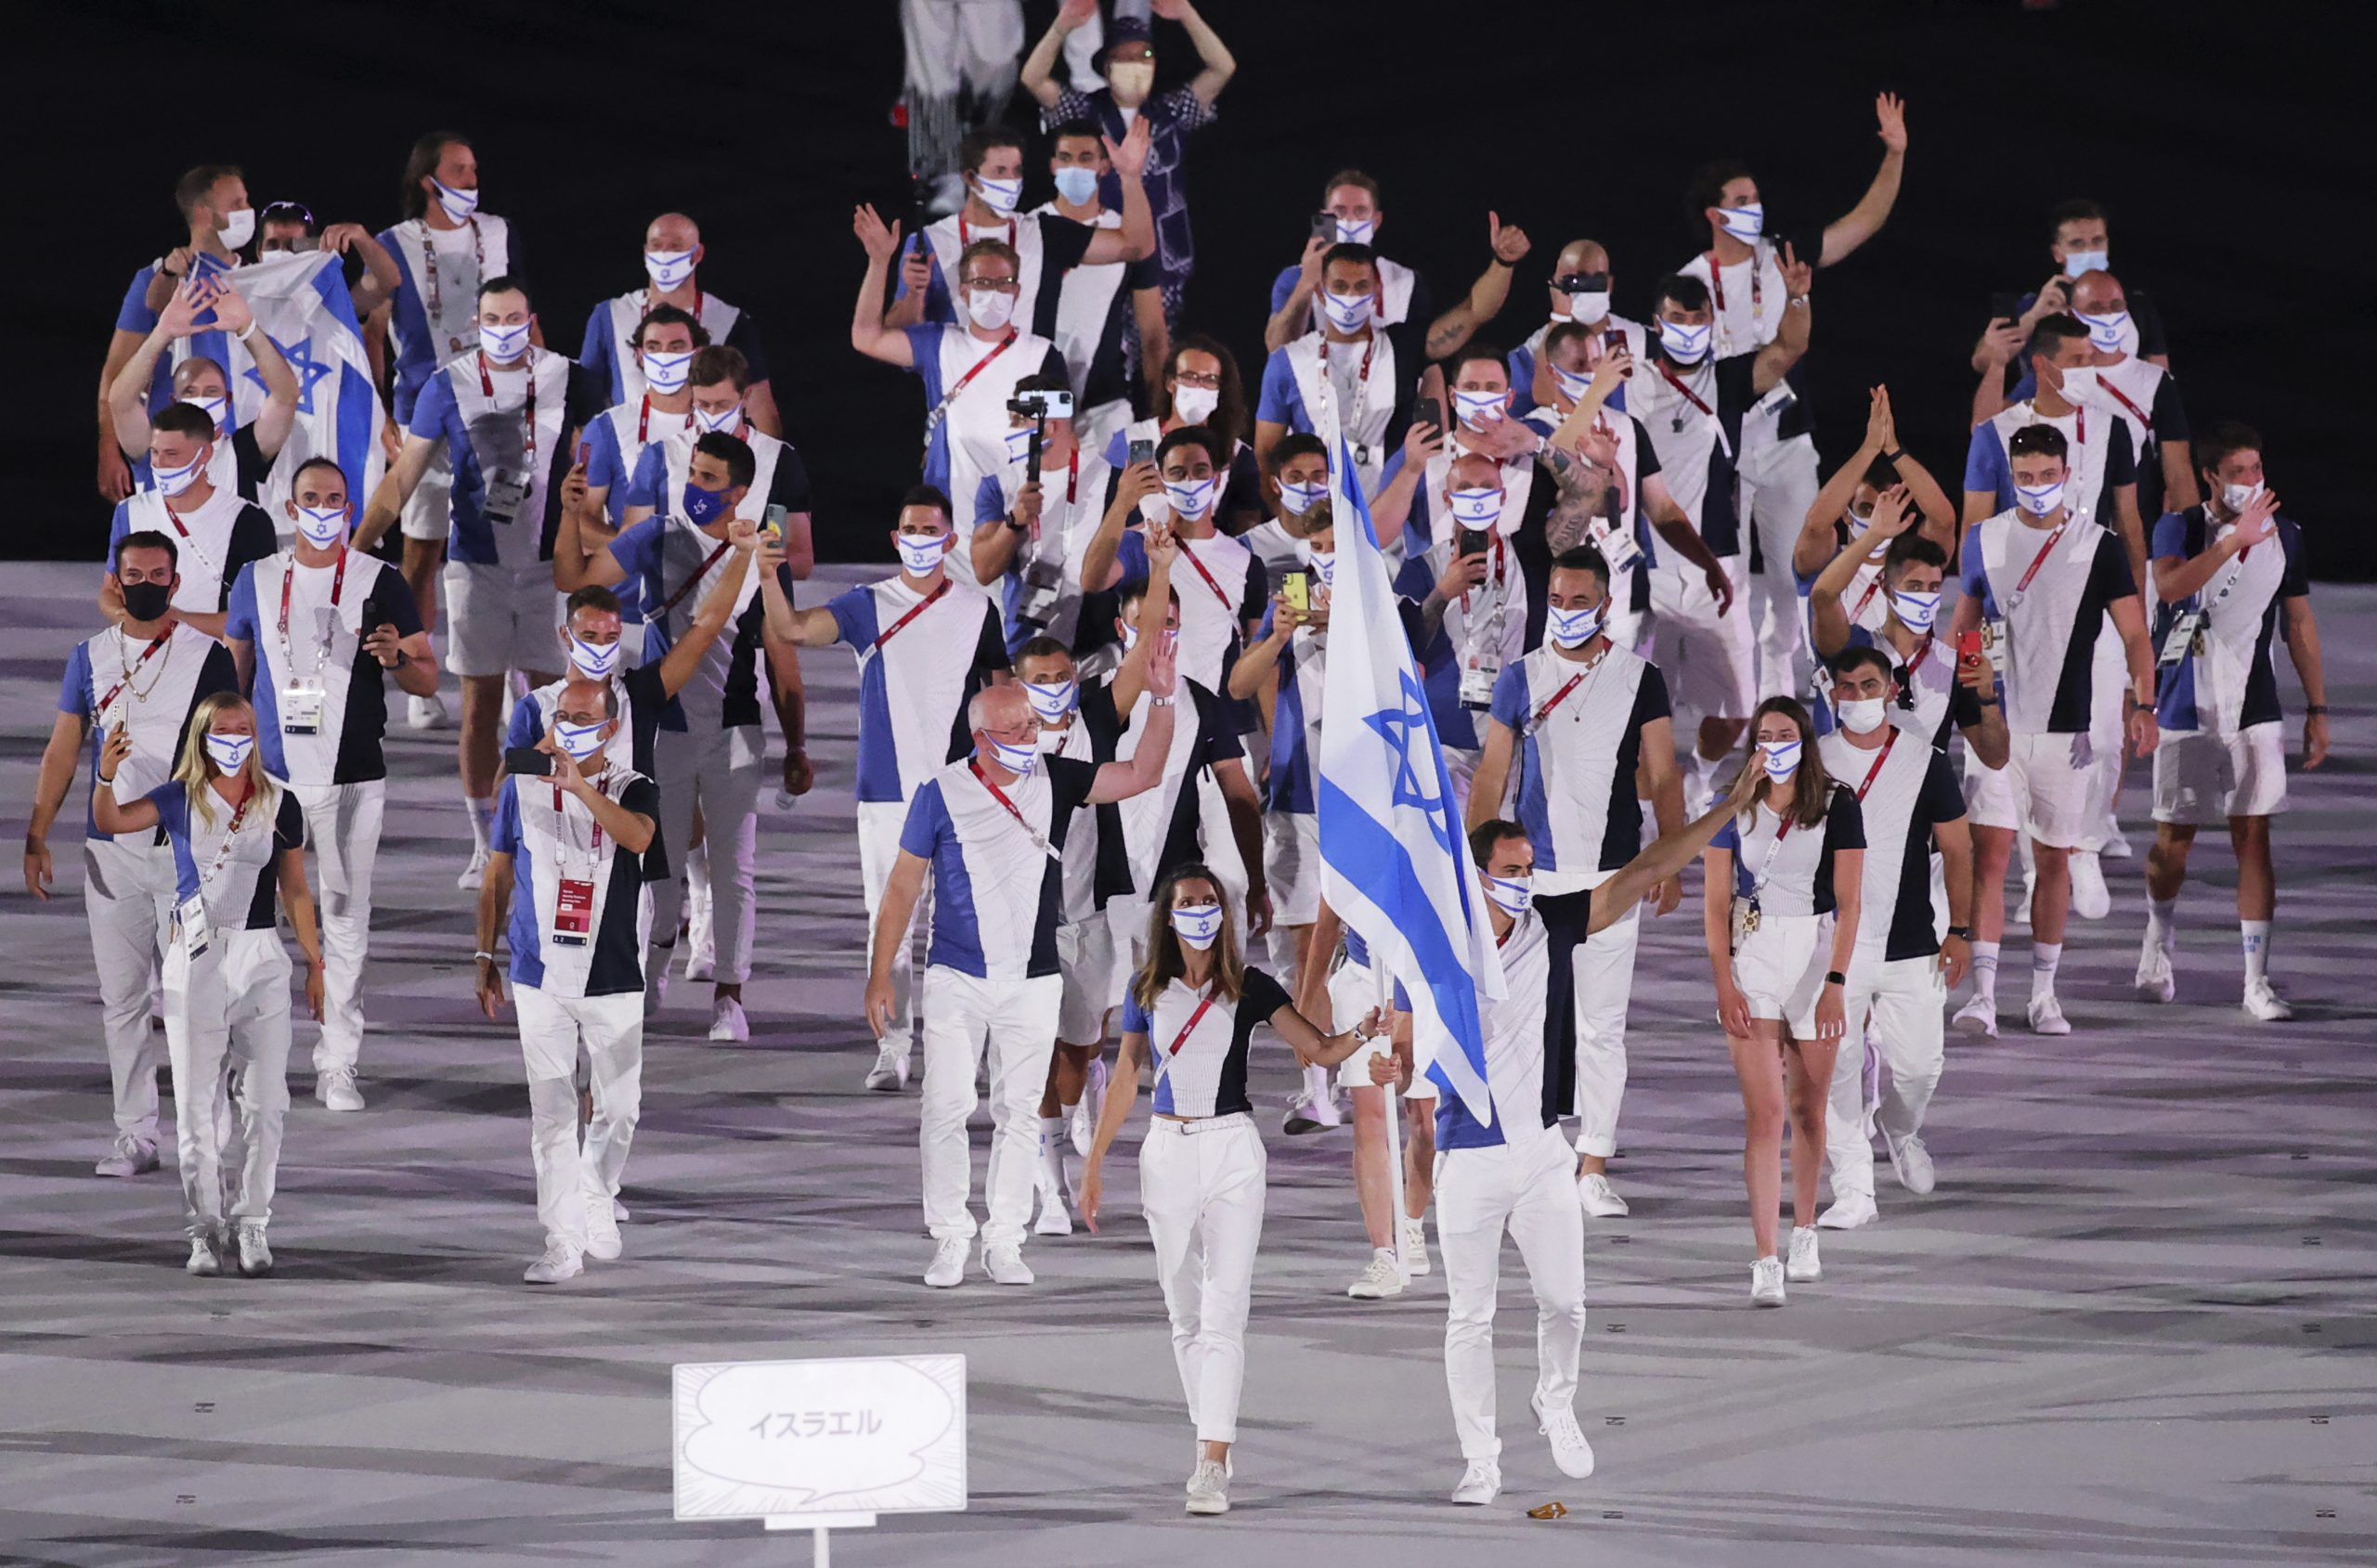 Israel's delegation members attend the Parade of Athletes during the Opening Ceremony of the Tokyo 2020 Olympic Games at National Stadium in Tokyo on July 23rd, 2021. Eleven thousand people coming from two hundred six countries and regions will participate in the event.( The Yomiuri Shimbun via AP Images )